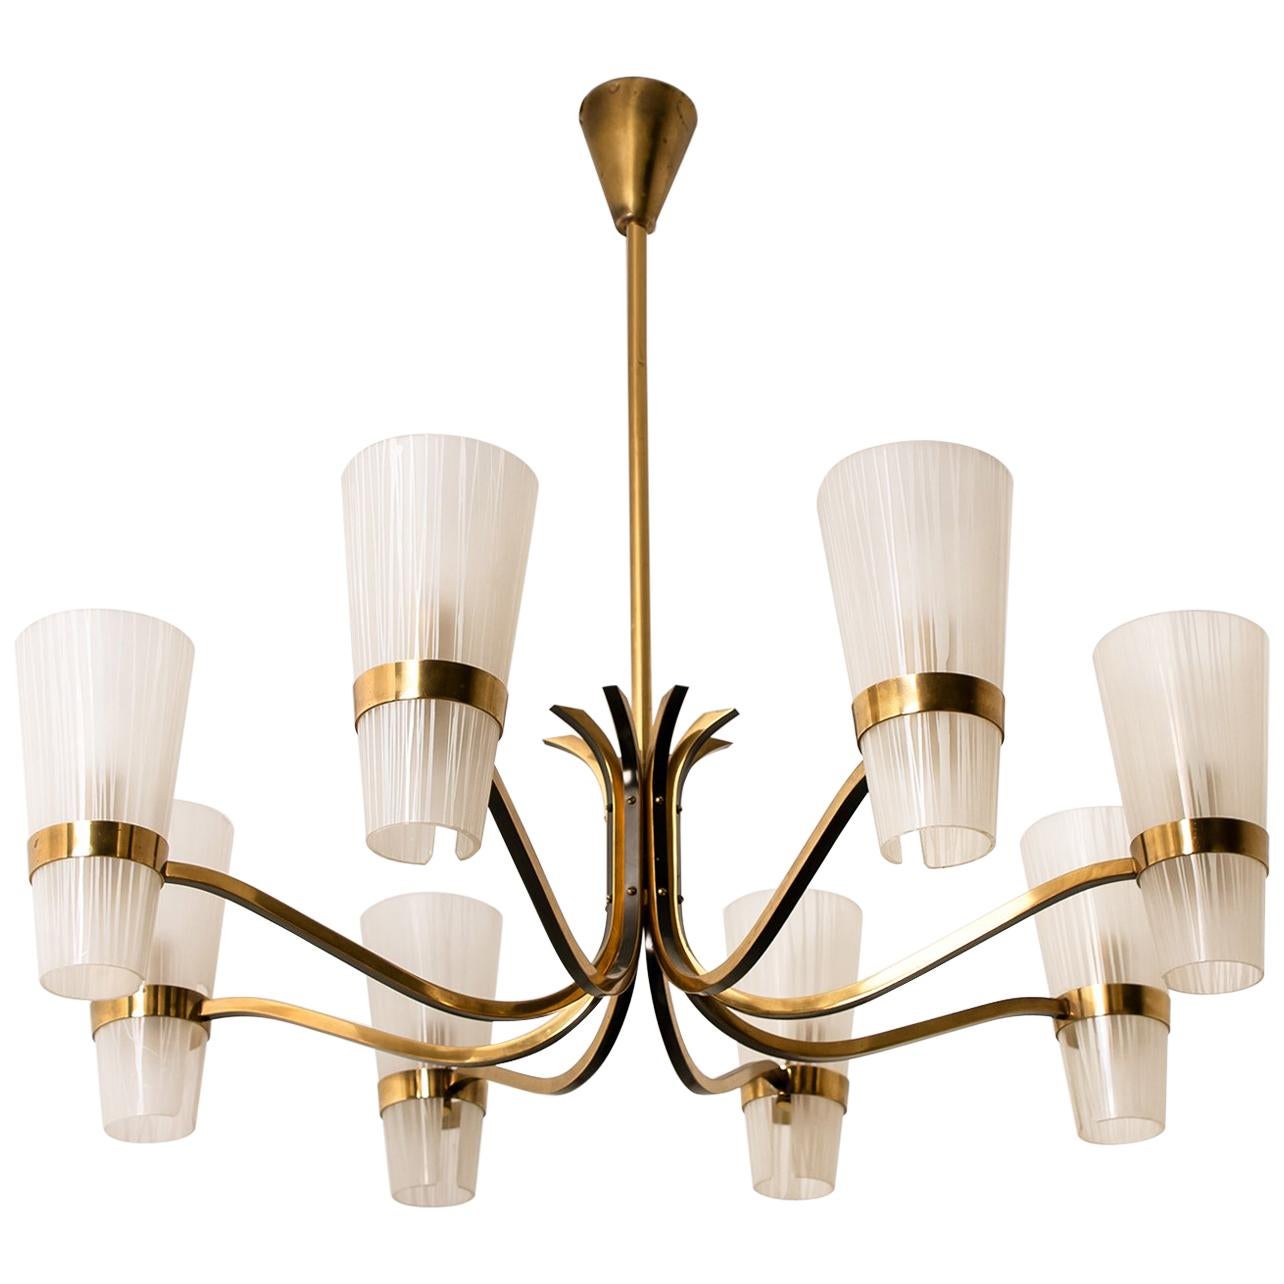 Brass and Wood Sputnik Chandelier in the Style of Hillebrand, 1960s